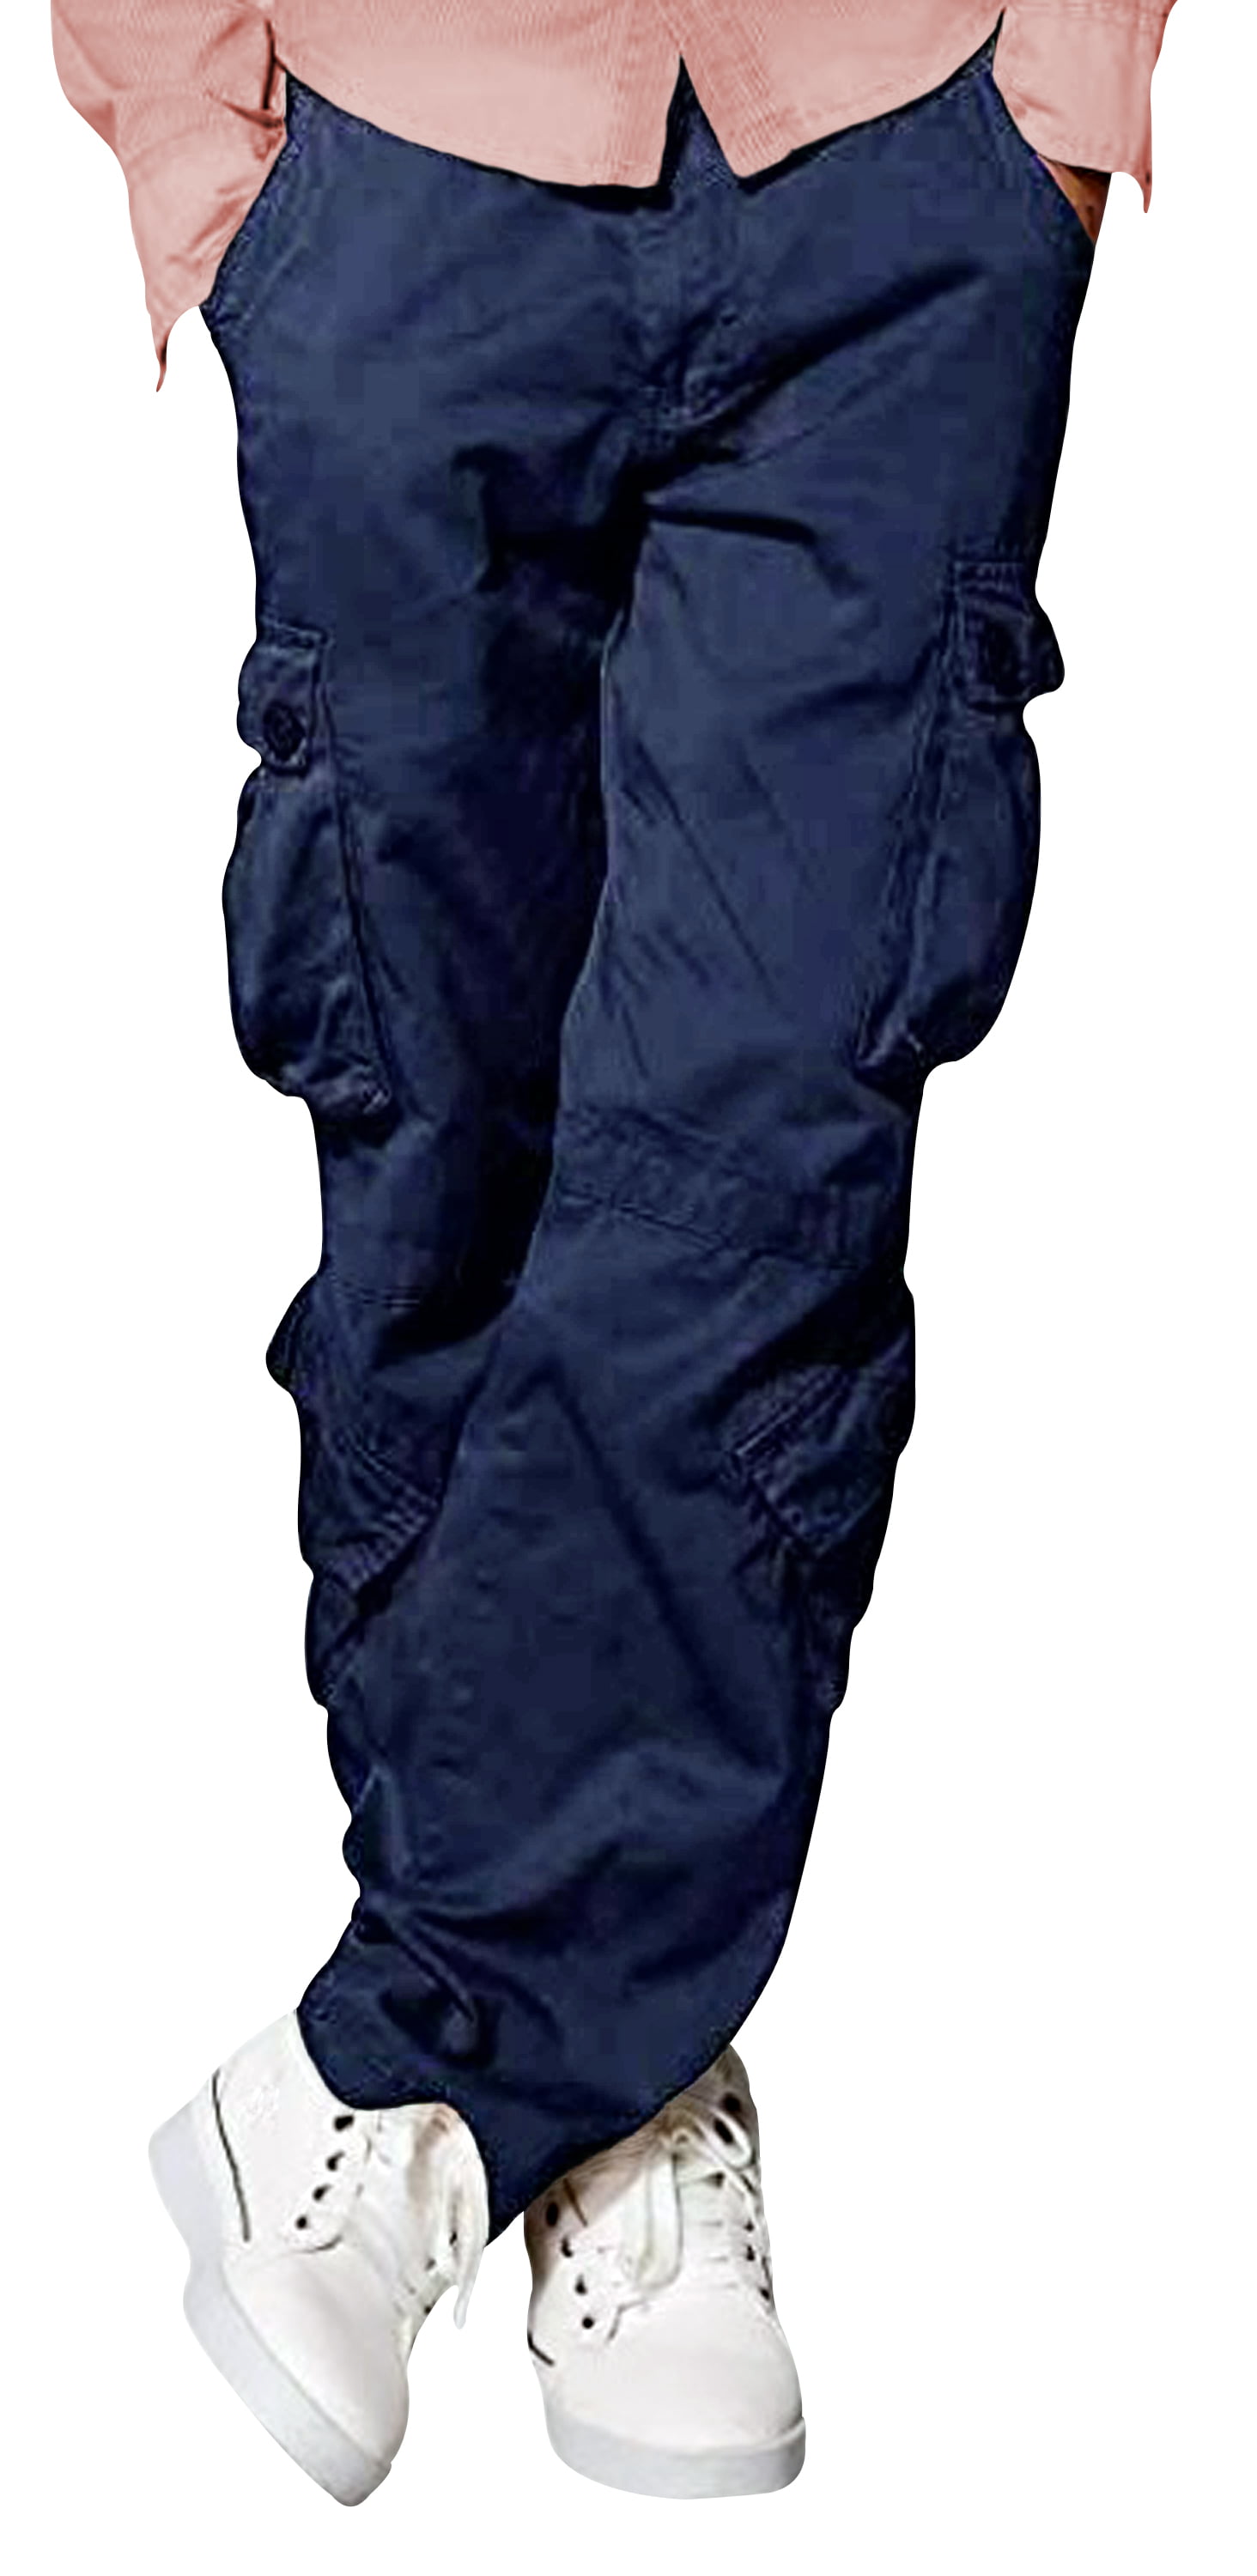 Mens NEW Heavy Duty Triple Stitch Cargo Trade Work Combat Pants Work Trousers. 